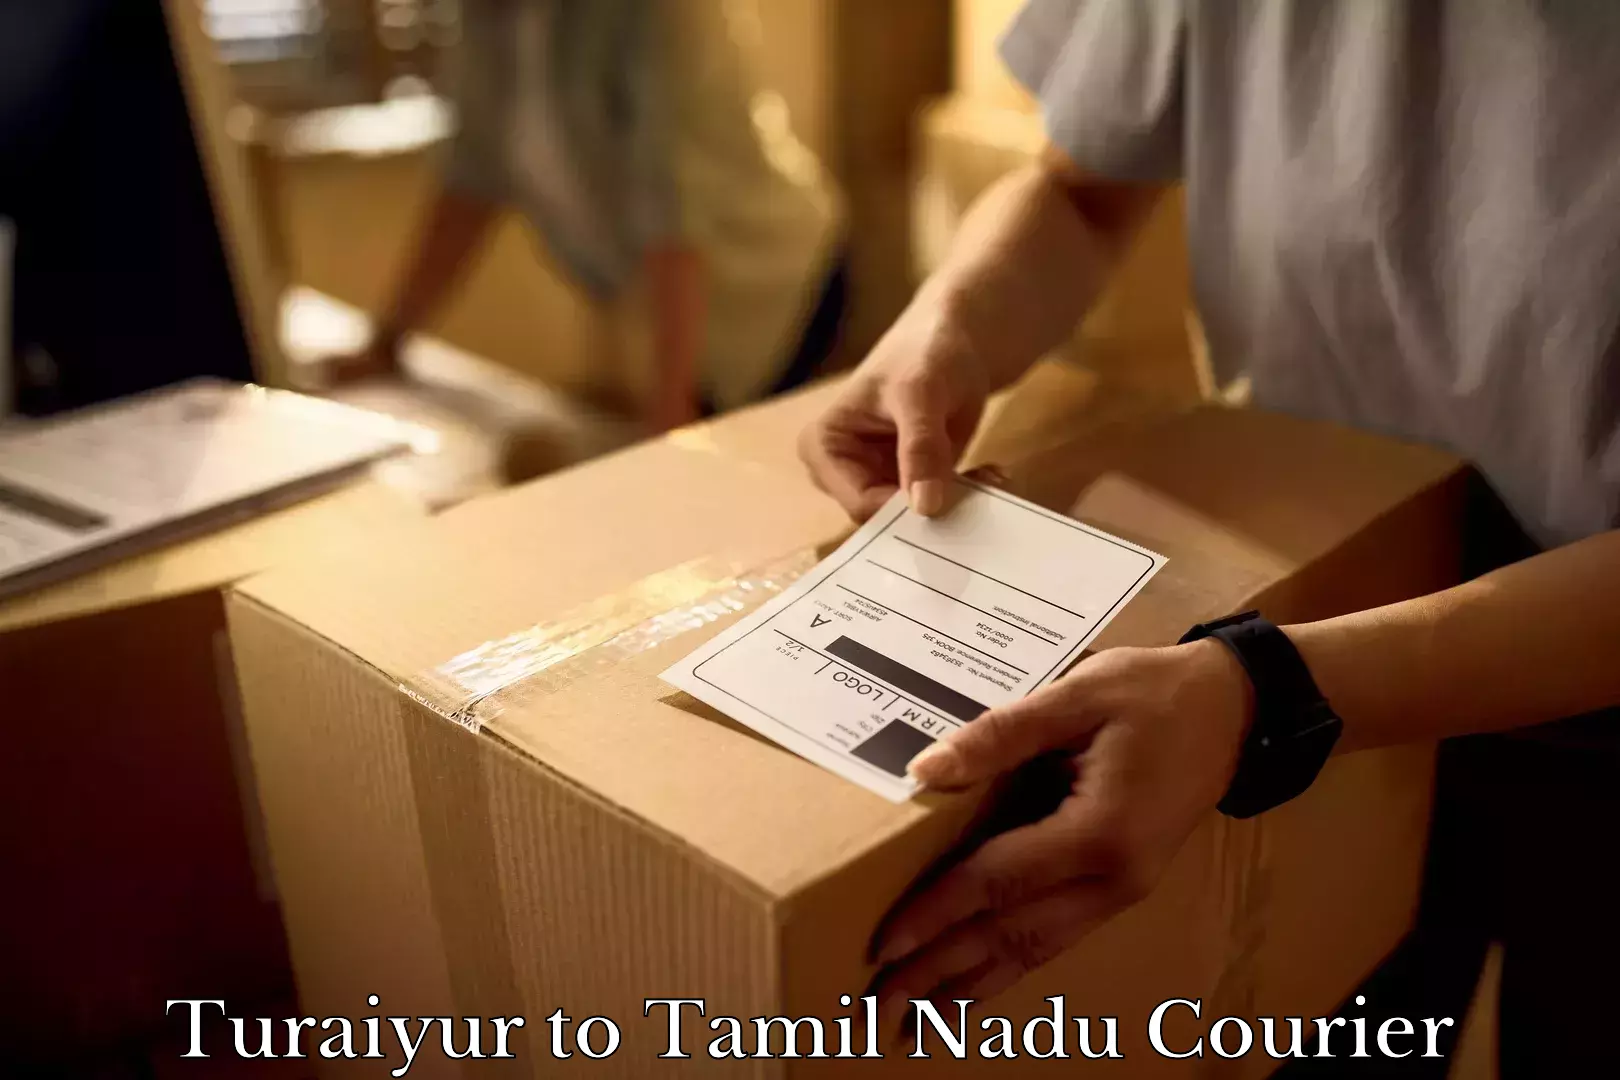 Furniture relocation experts Turaiyur to Pennagaram